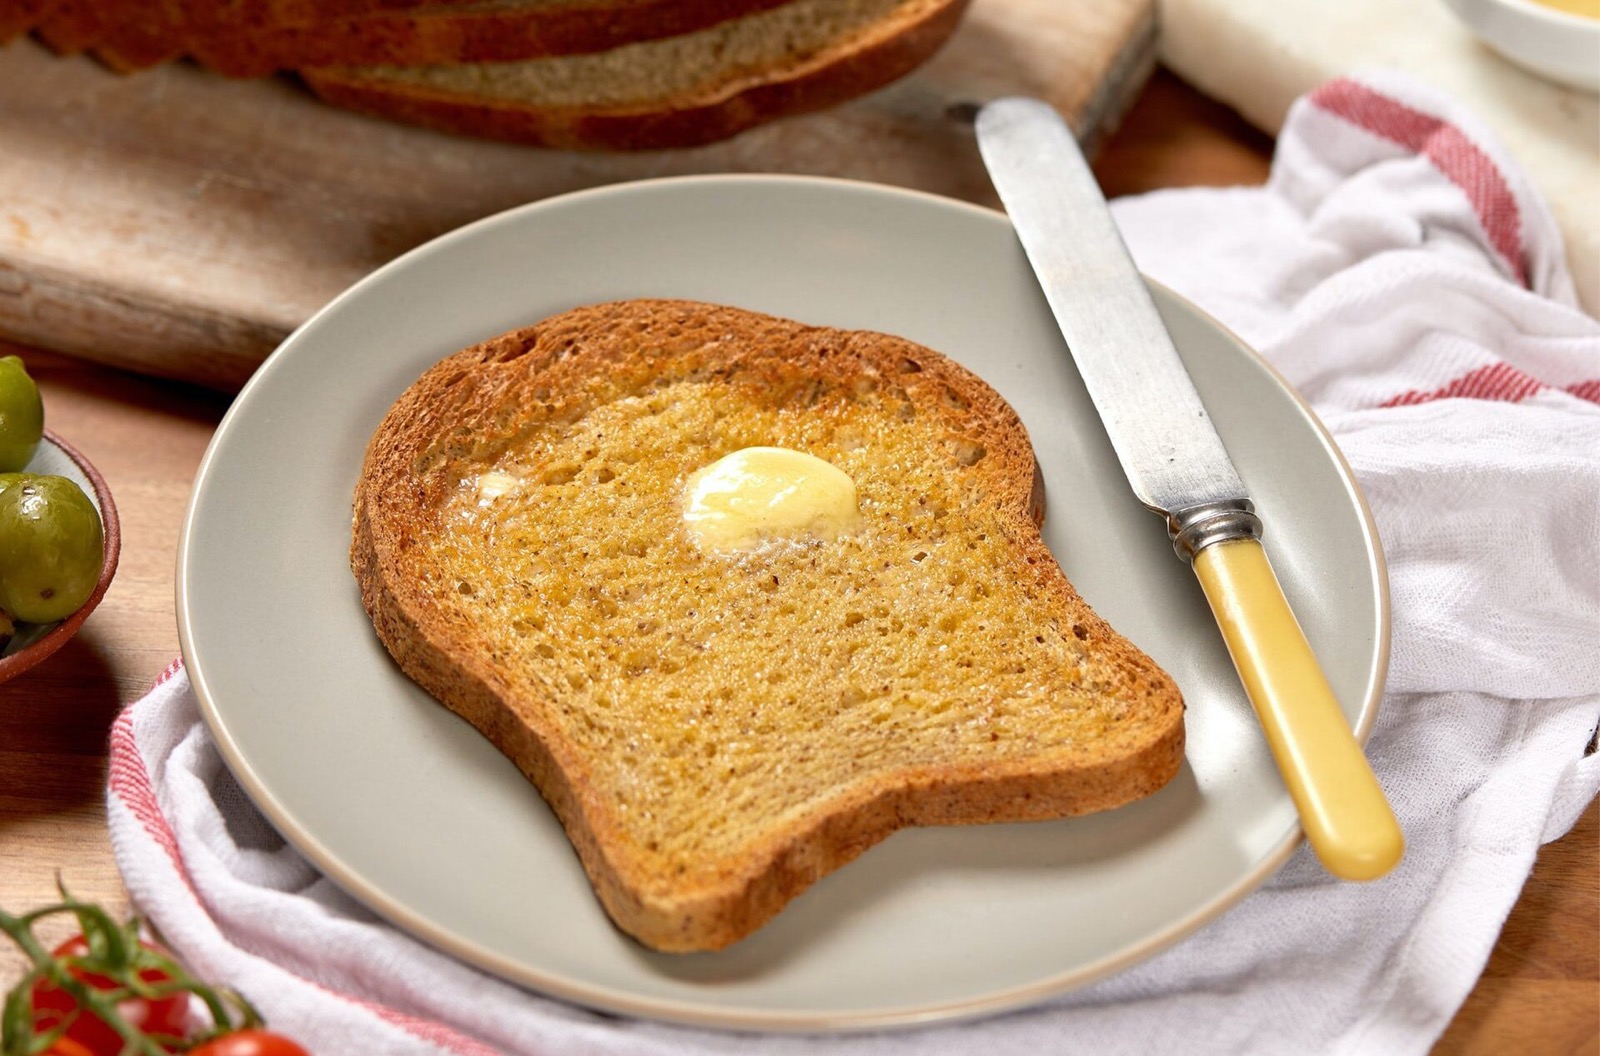 Buttered toast bread